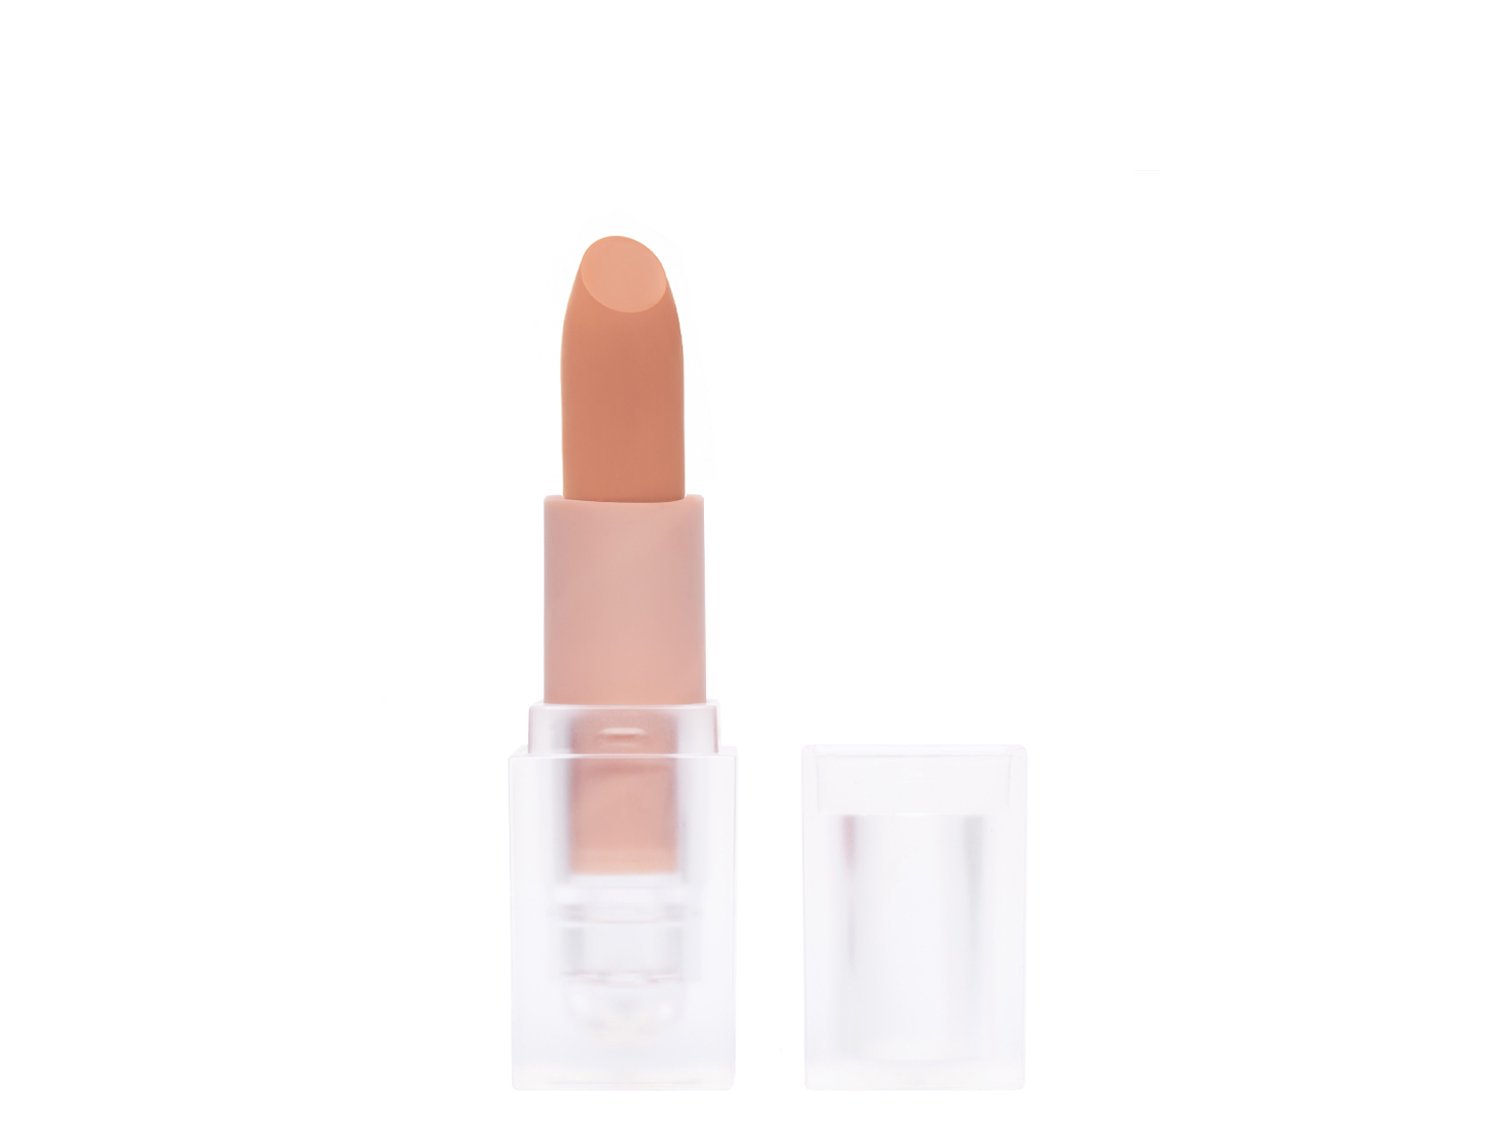 KKW-Matte-Cocoa-Lipstick-Vial-90sStyle-New-2_1